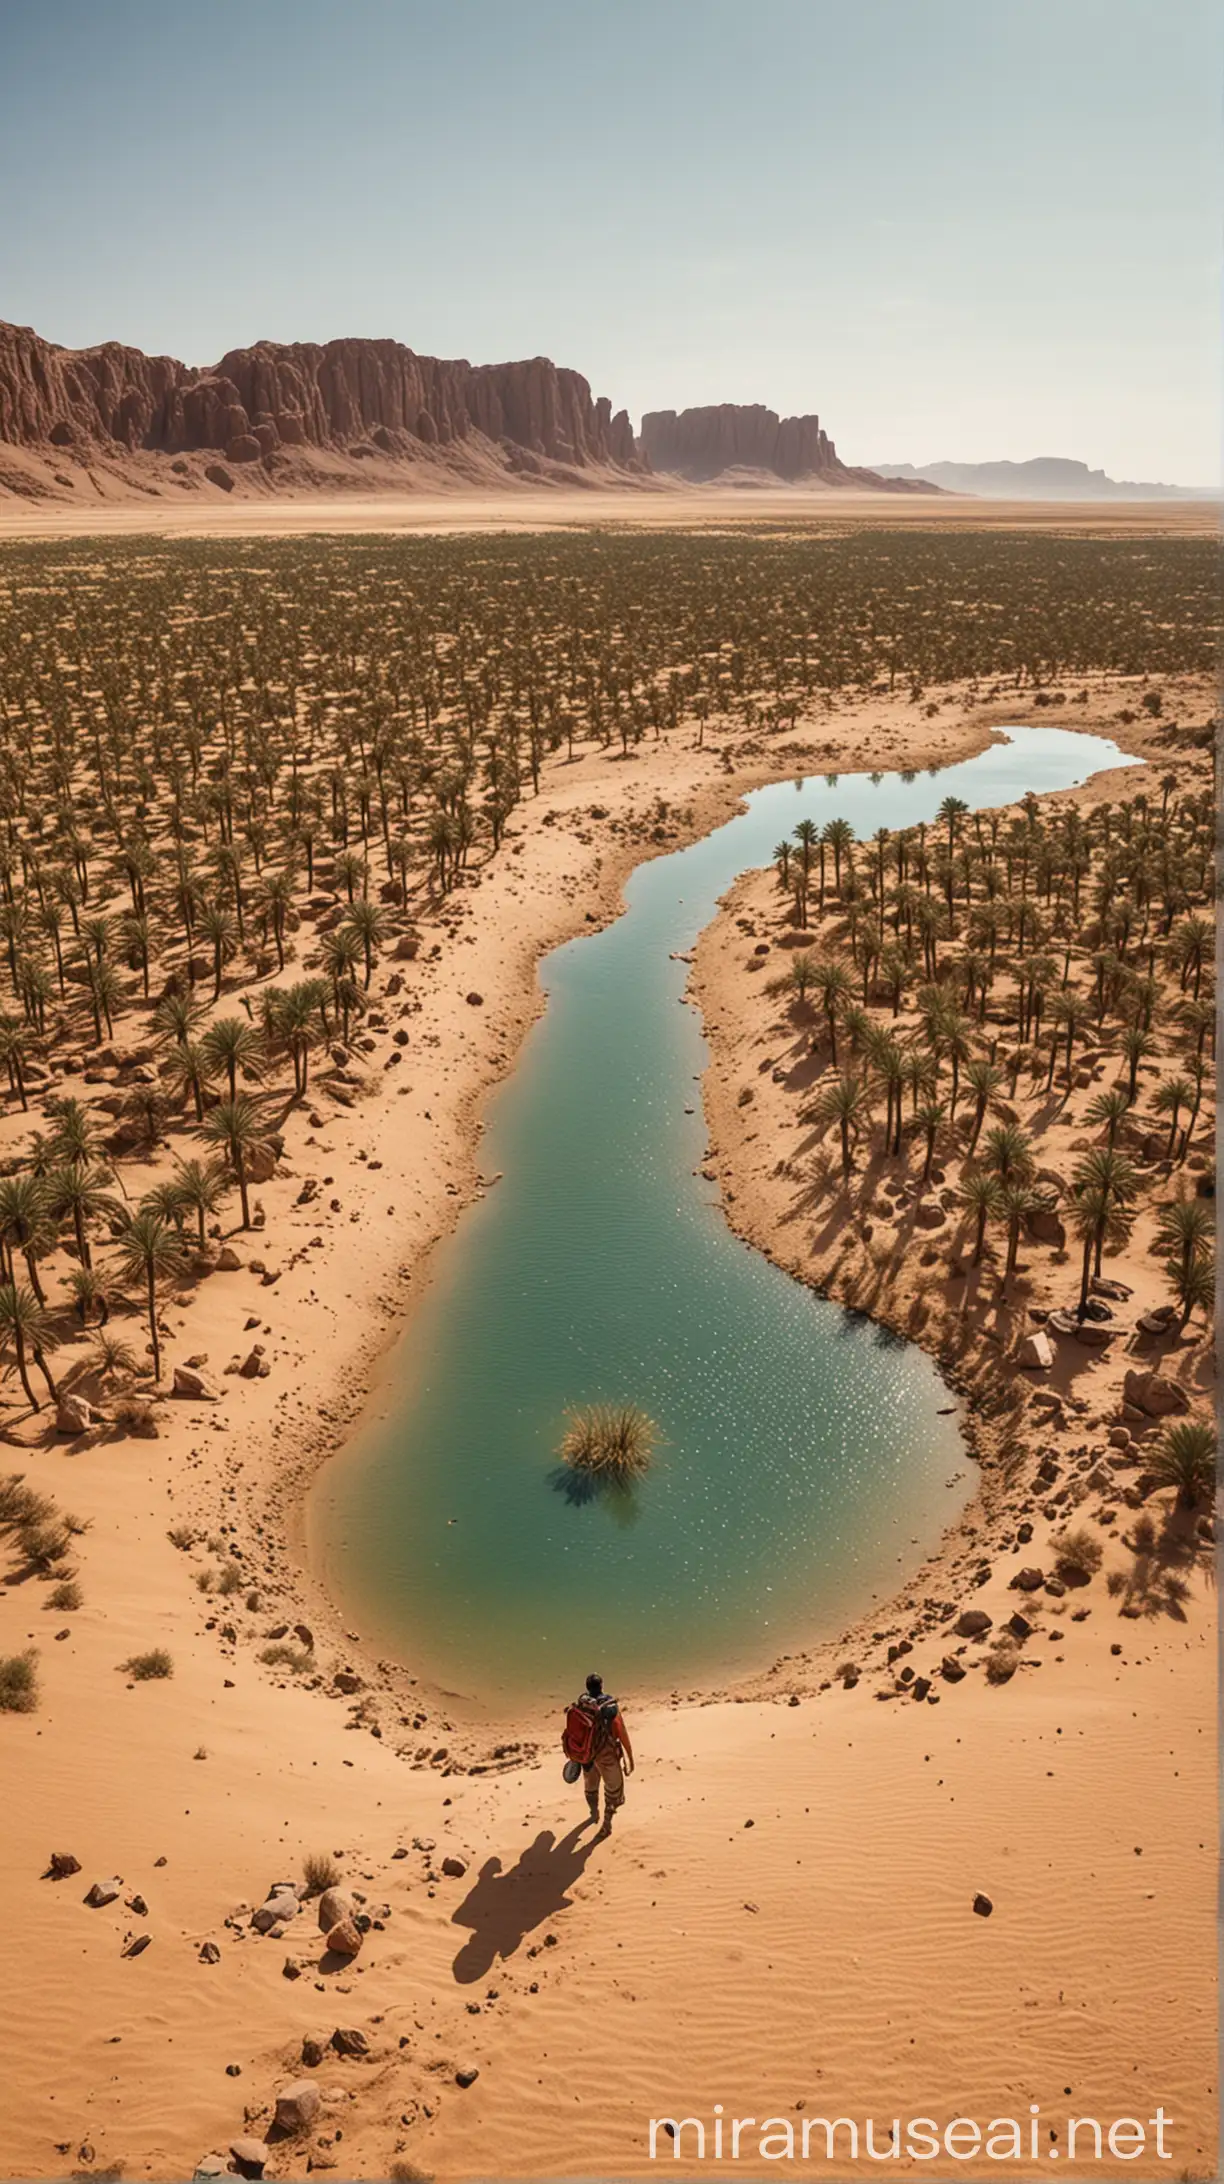 A traveler lost his way in the desert. He saw an oasis in the distance and headed towards it